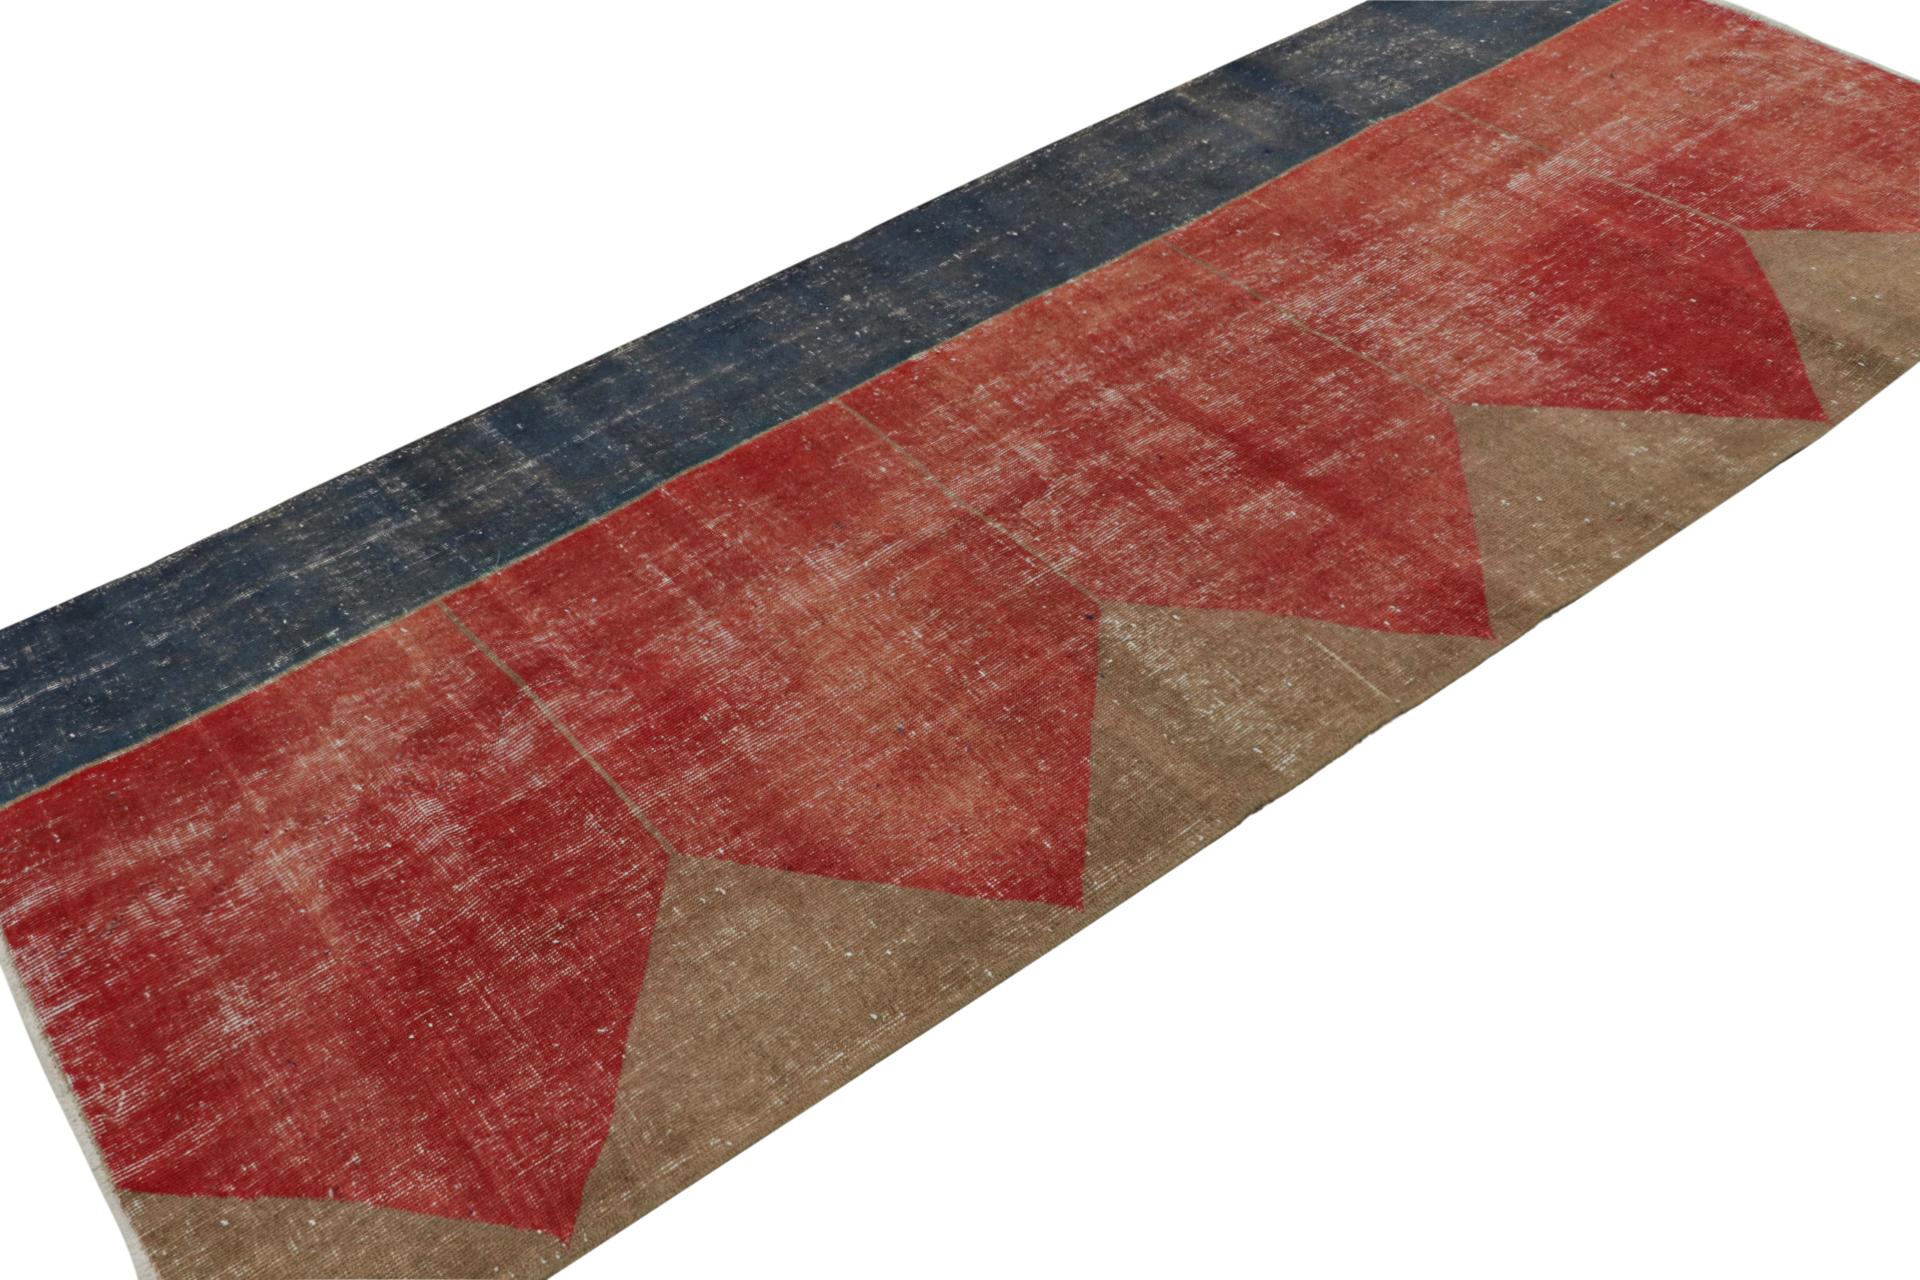 Hand Knotted in wool, this distressed vintage 4x10 Turkish rug, which is inspired by Saf rugs, a particular kind of prayer rug, features a red field and geometric patterns in hues of bronze and navy blue.  

On the Design: 

Connoisseurs will admire